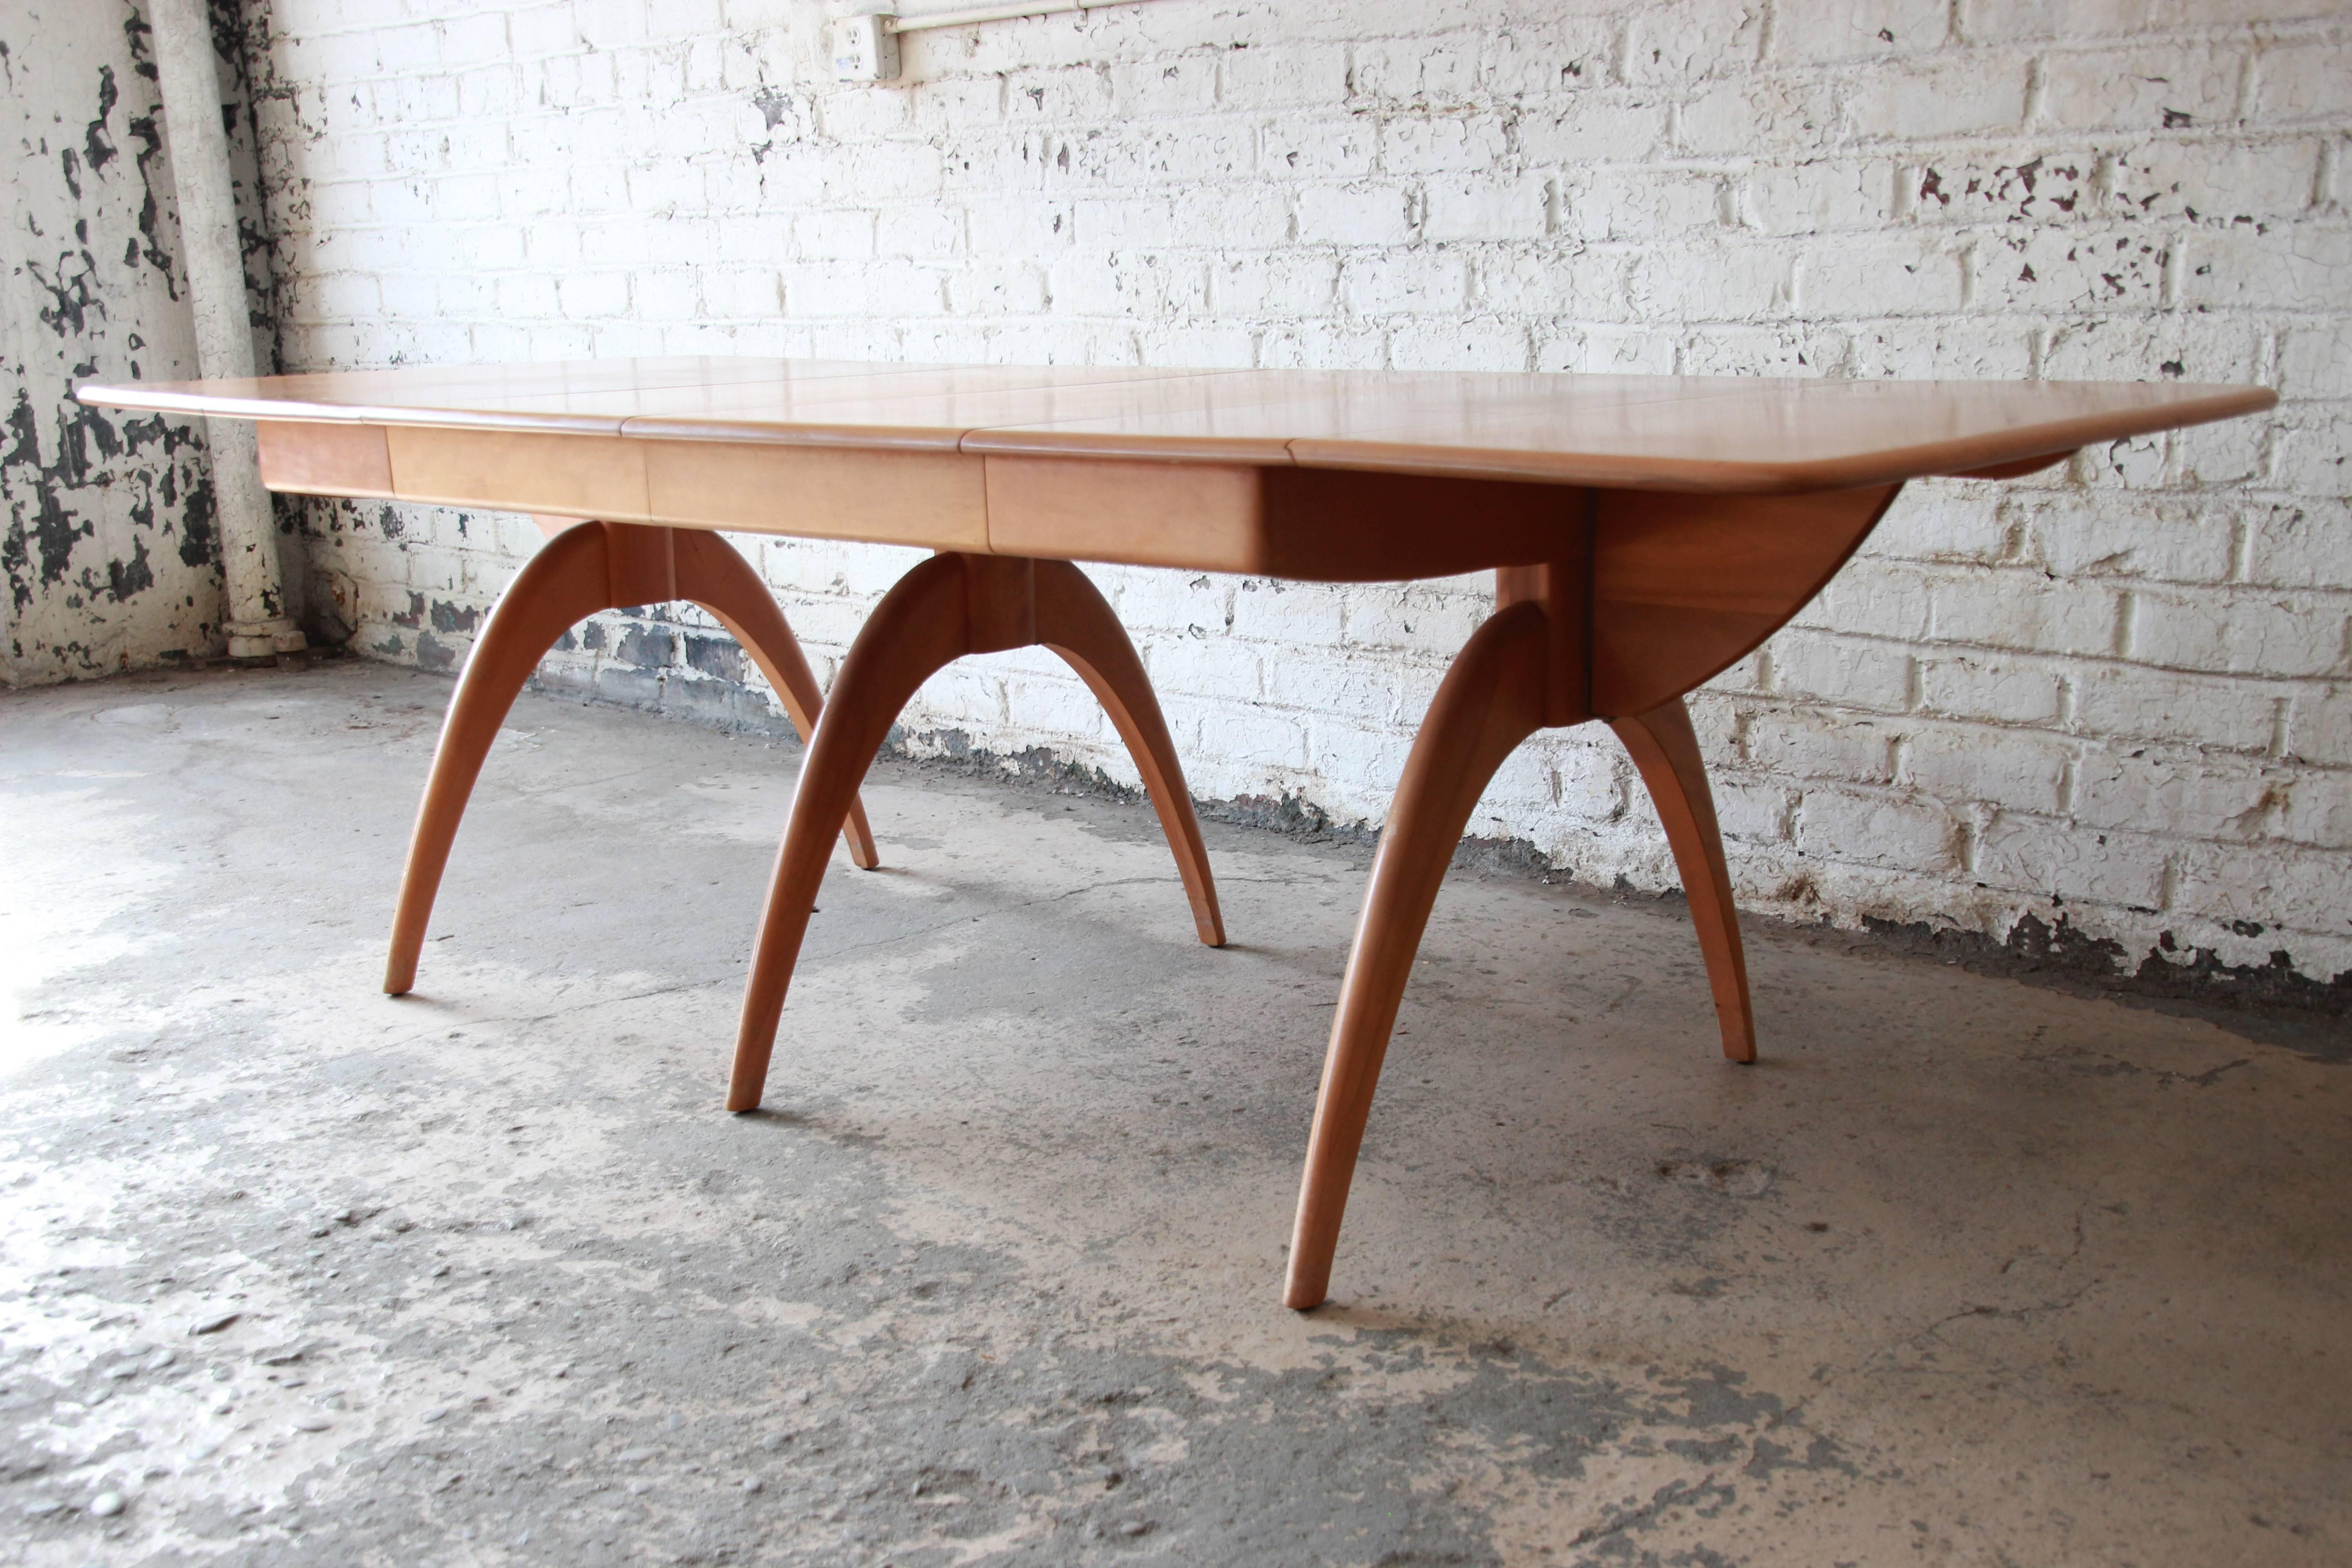 An exceptional Mid-Century Modern extension drop-leaf wishbone dining table by Heywood-Wakefield. The table is well constructed from solid maple and features sculpted 